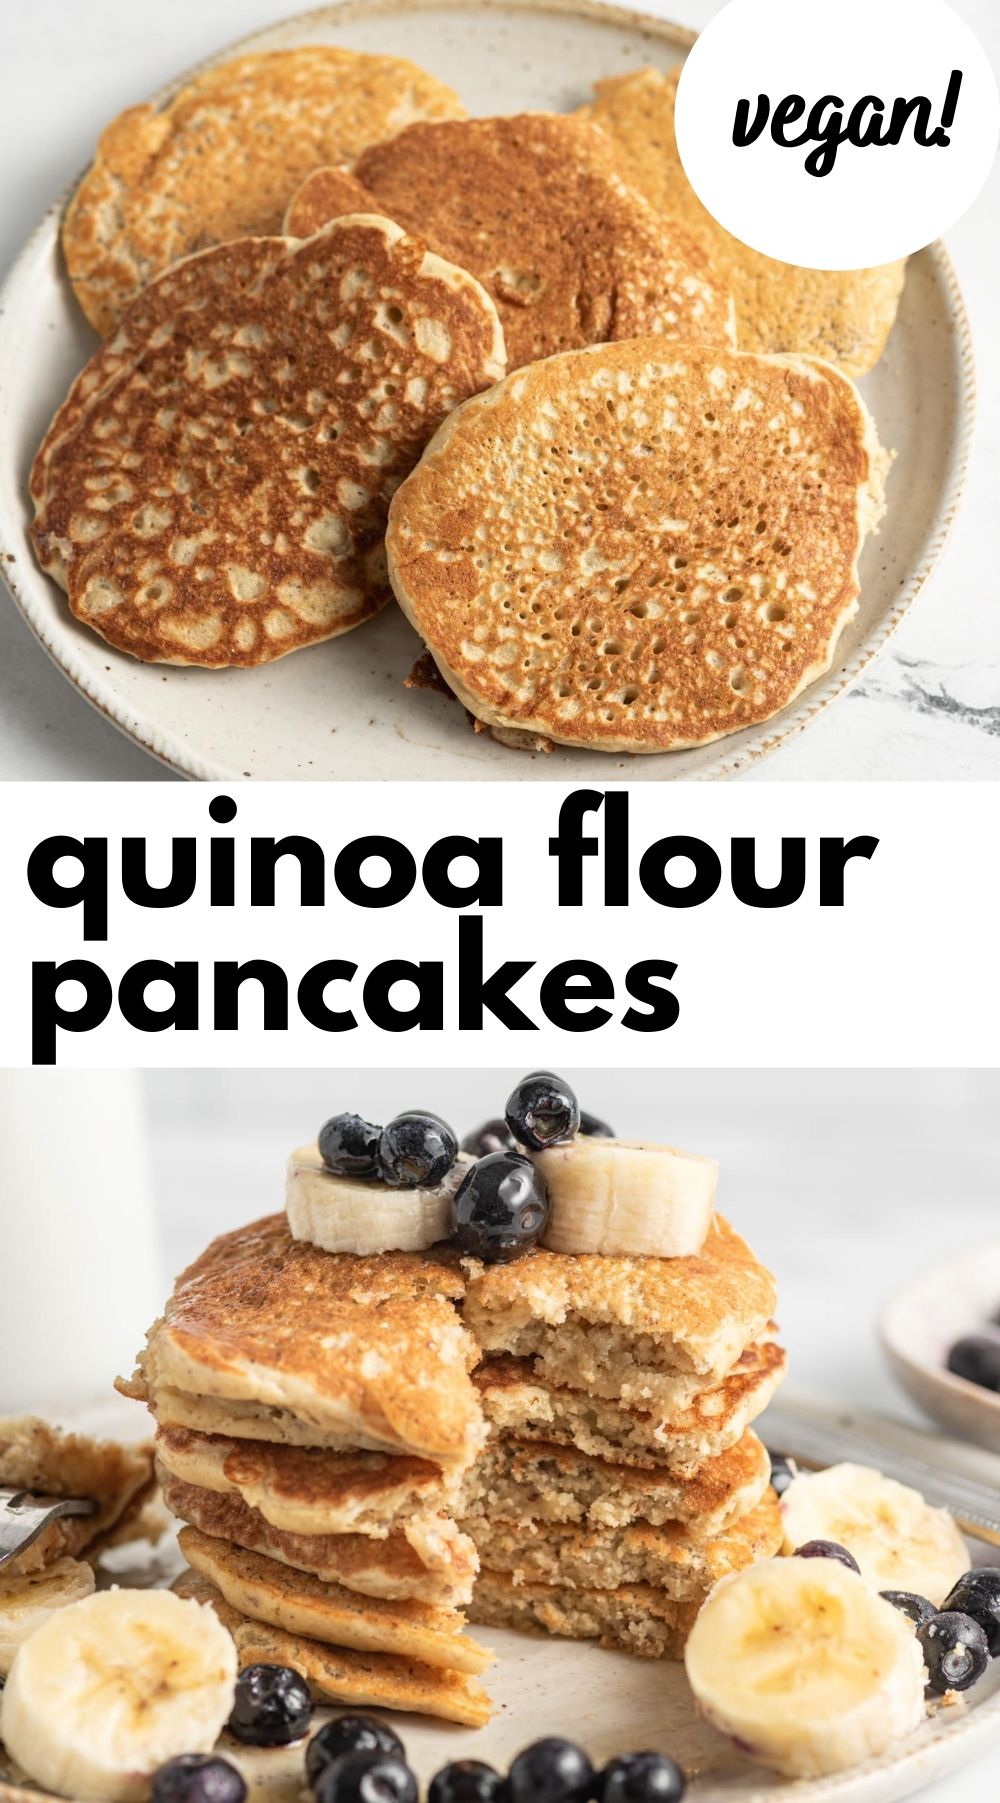 Pinterest graphic with an image and text for a vegan quinoa flour pancake recipe.